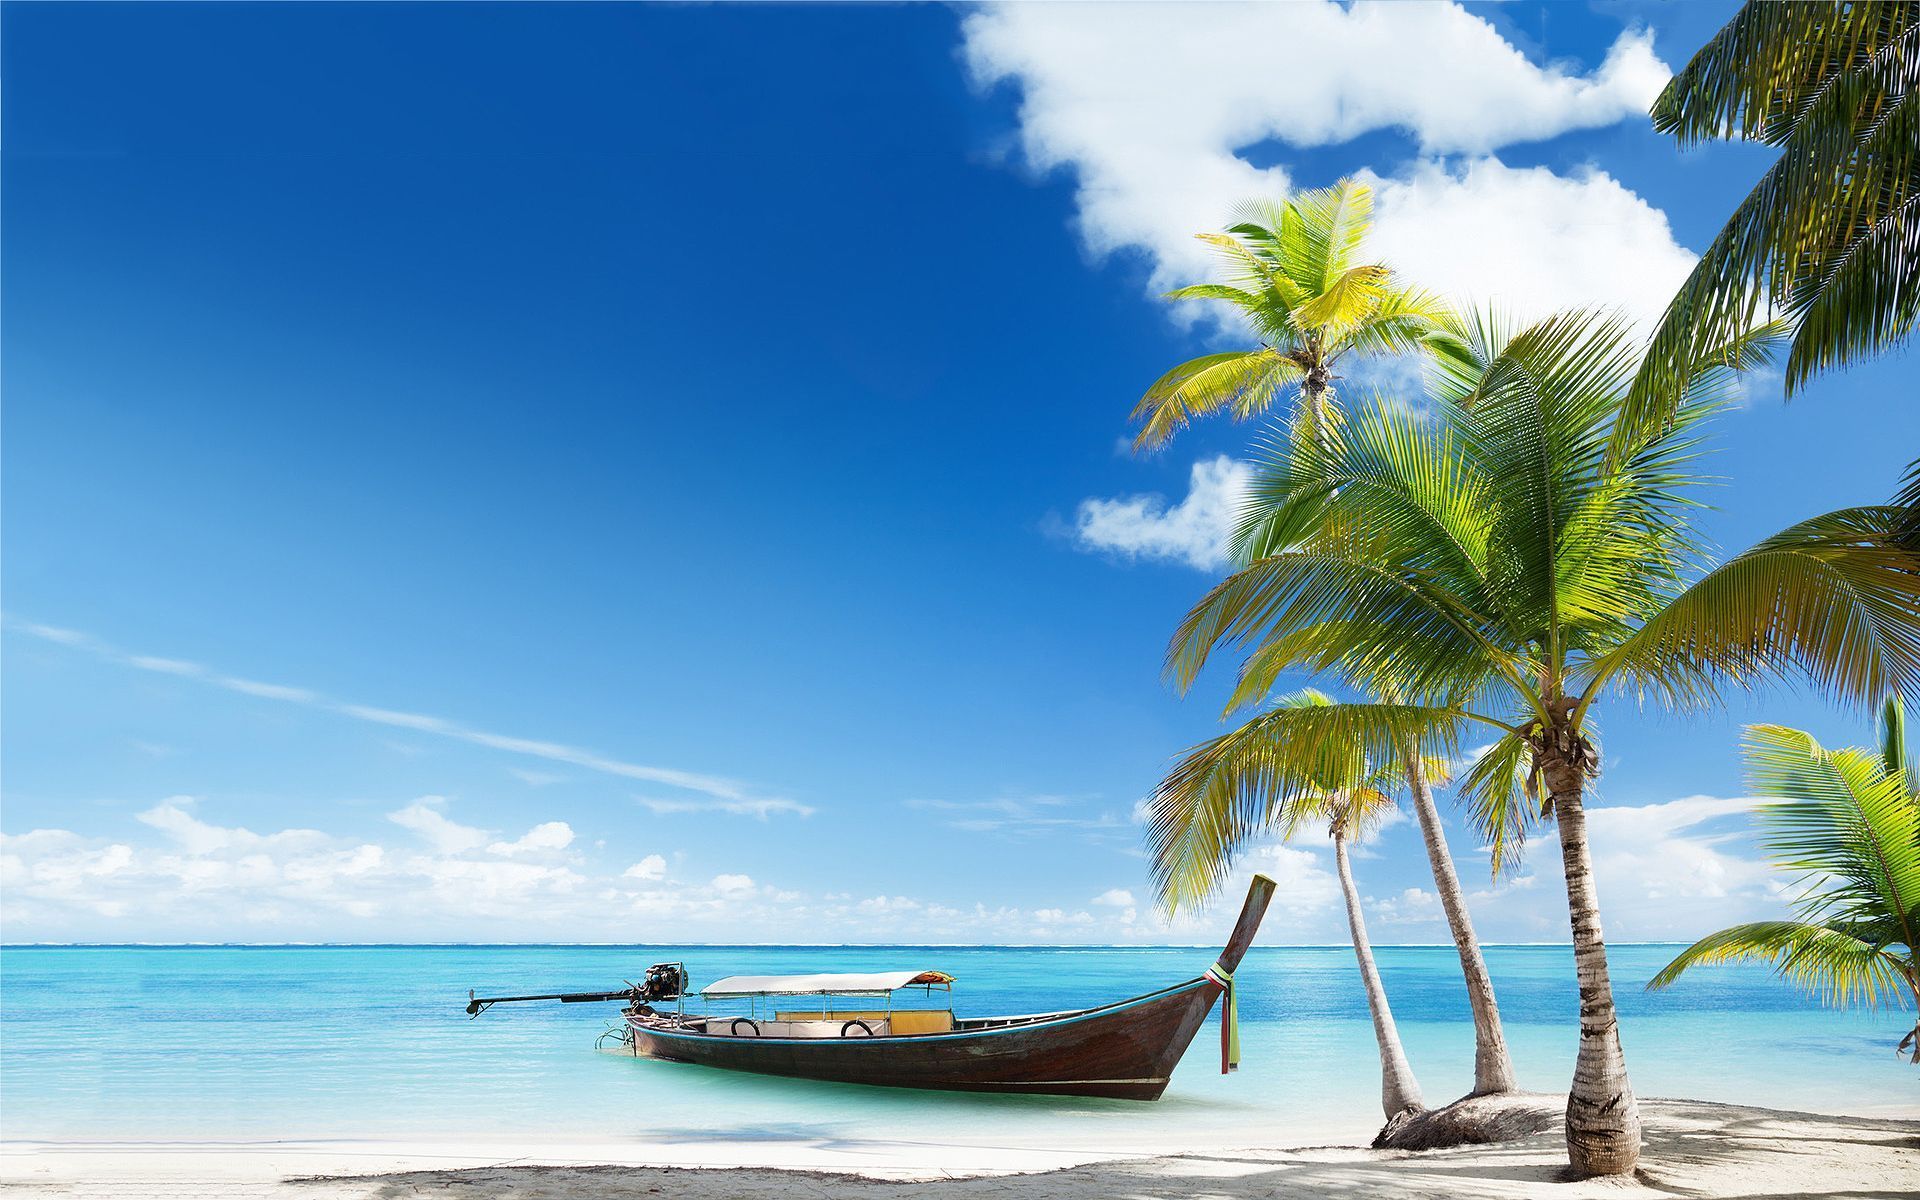 Beach HD Wallpapers Desktop Pictures | One HD Wallpaper Pictures ...